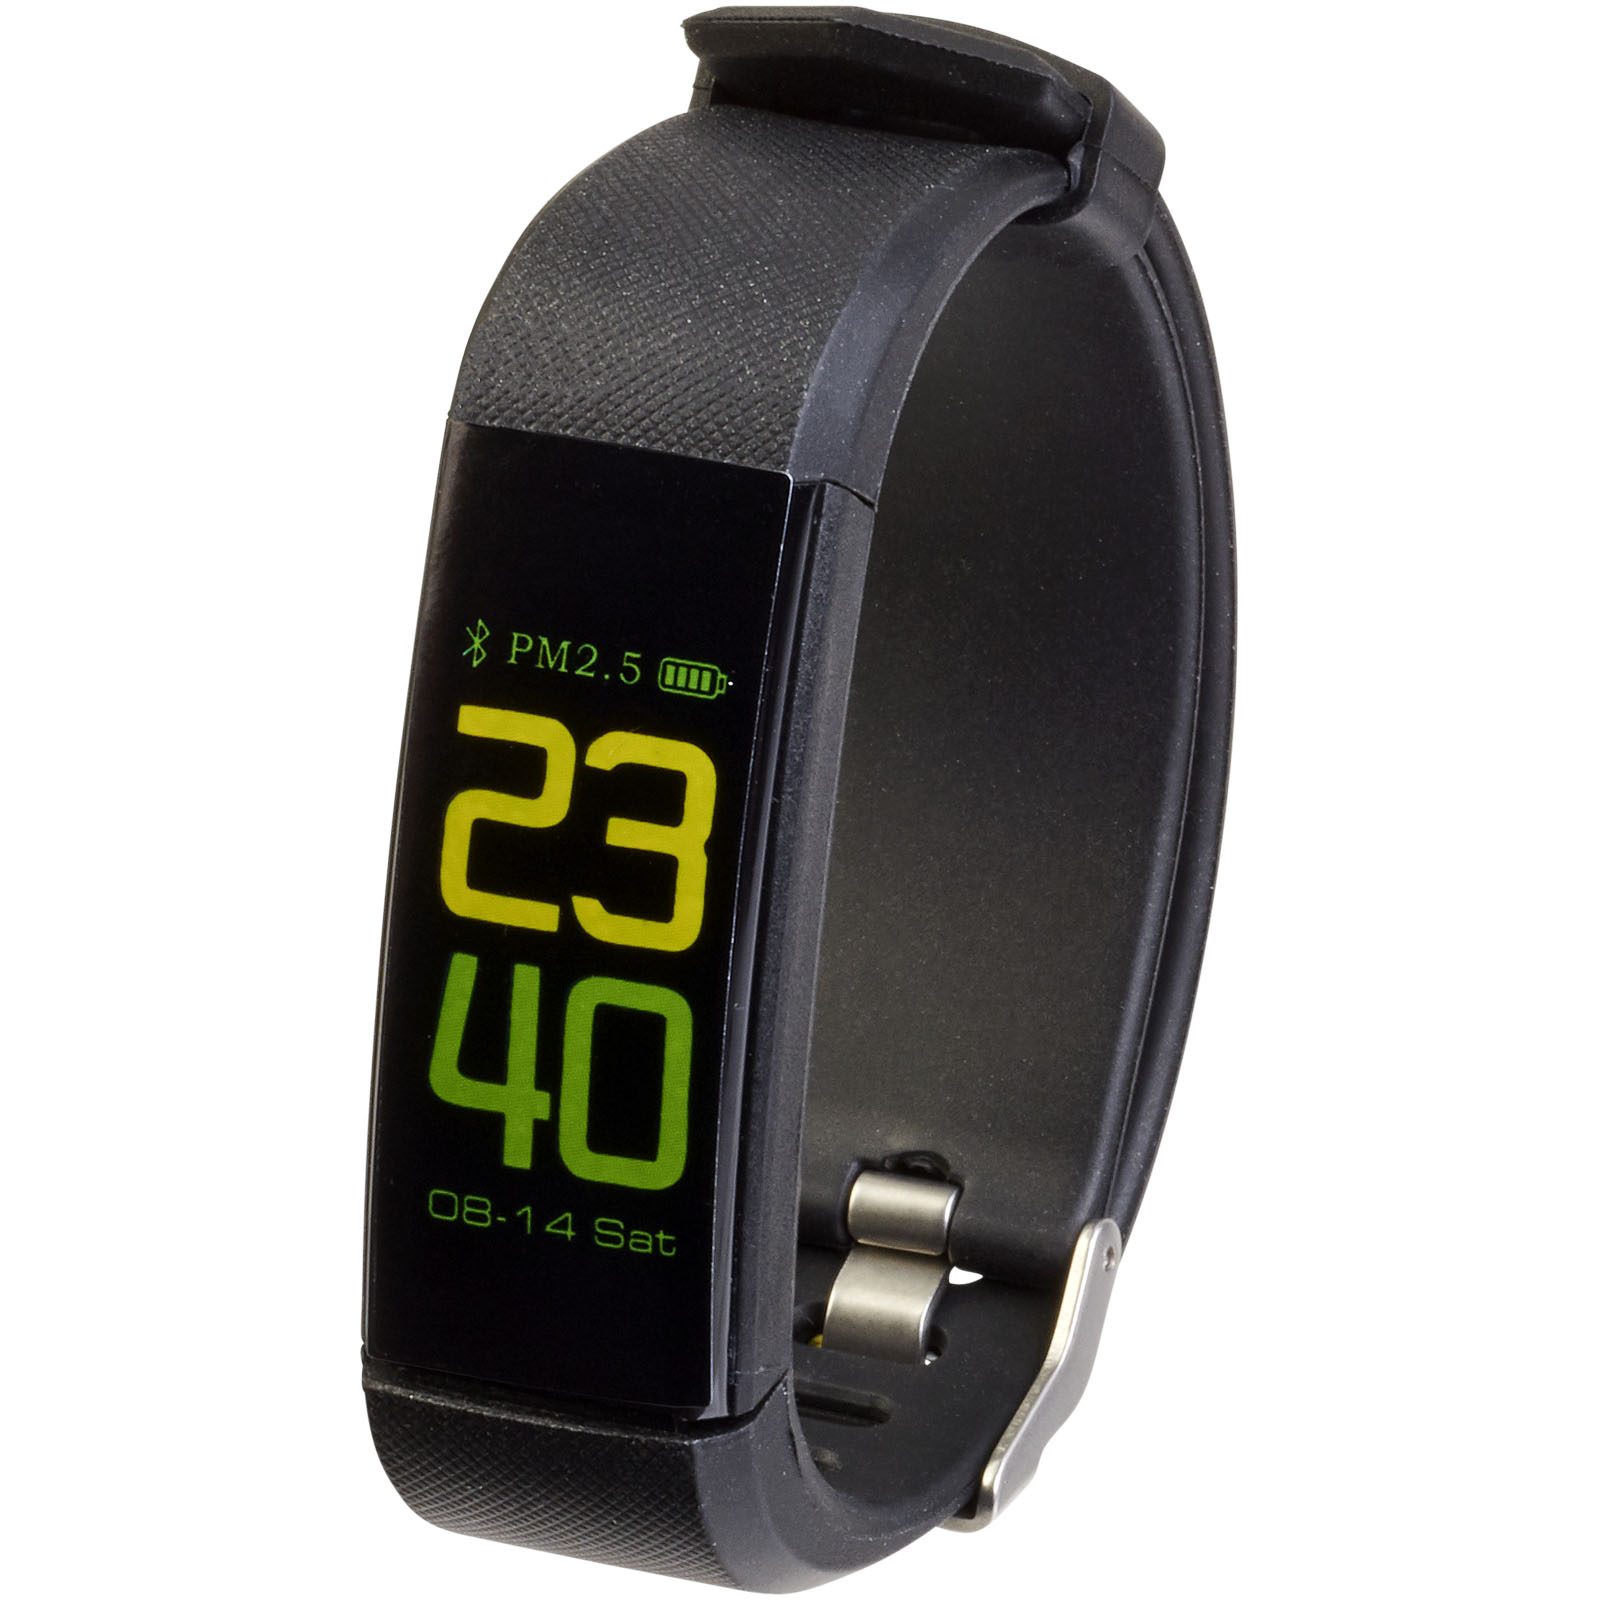 This is a waterproof fitness tracker that originated from Little Langdale. - Blackrod